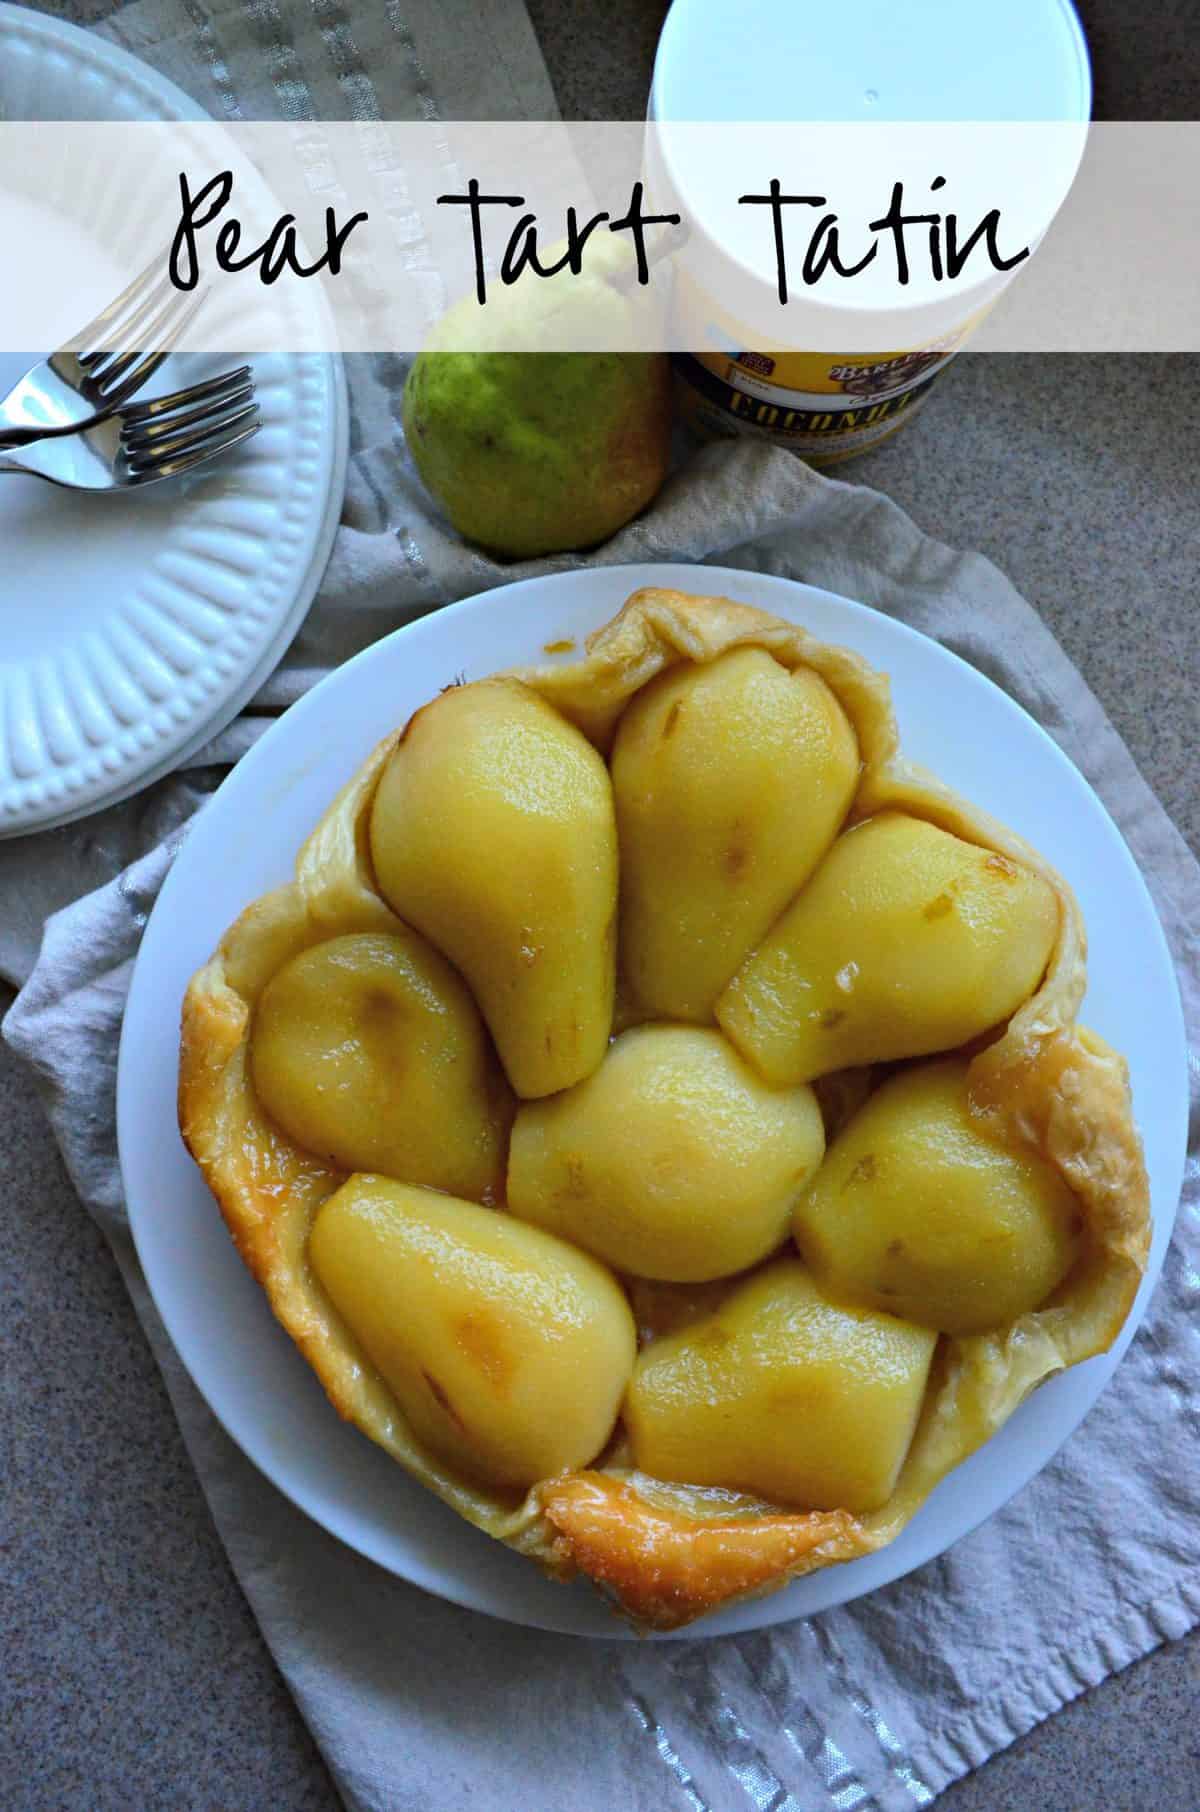  pastry-like crust filled with peeled golden pears on a white plate with title text.